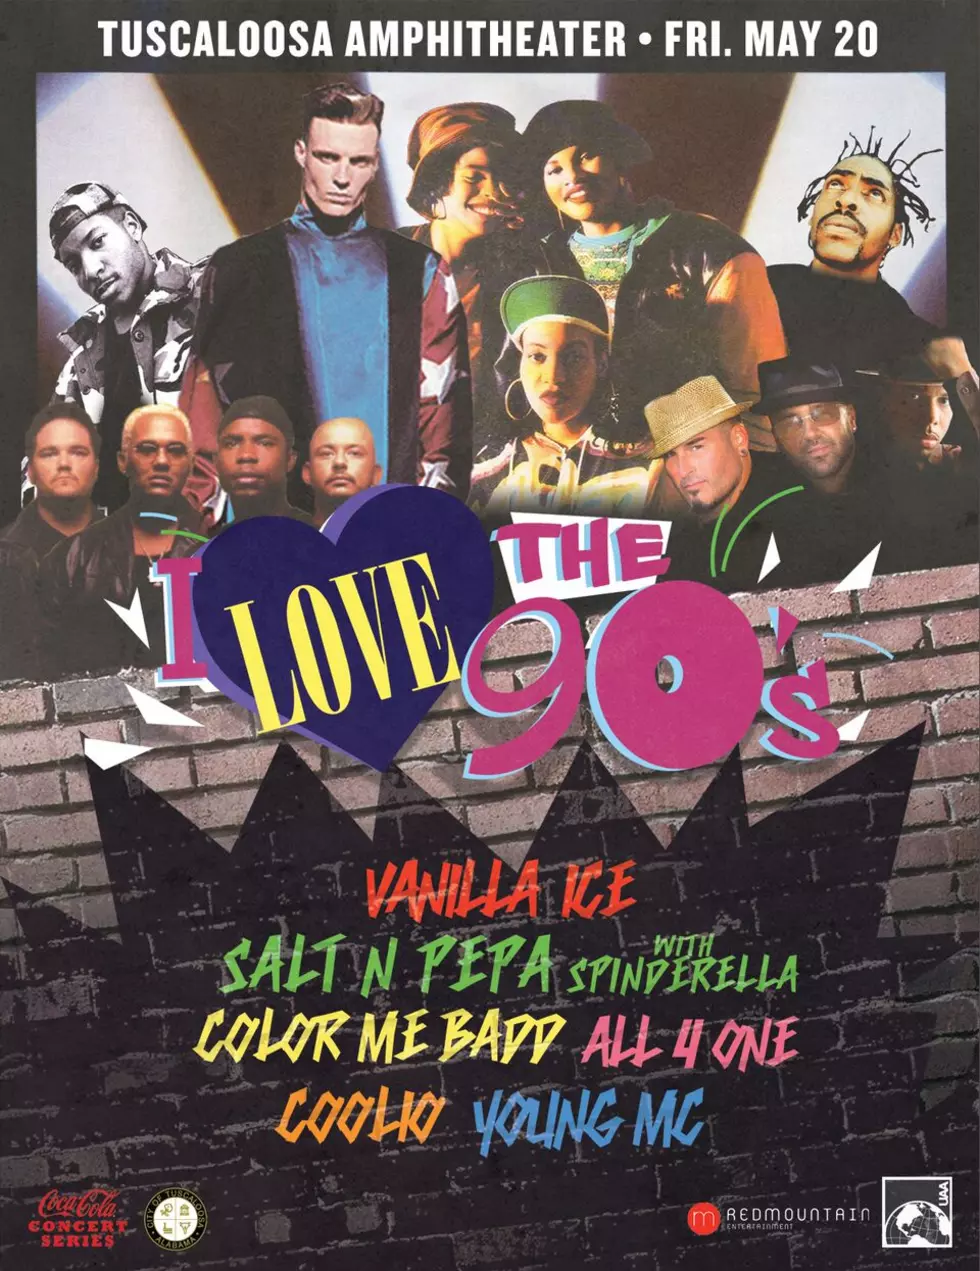 I Love The 90’s Tour Come To The Tuscaloosa Amphitheater Friday May 20